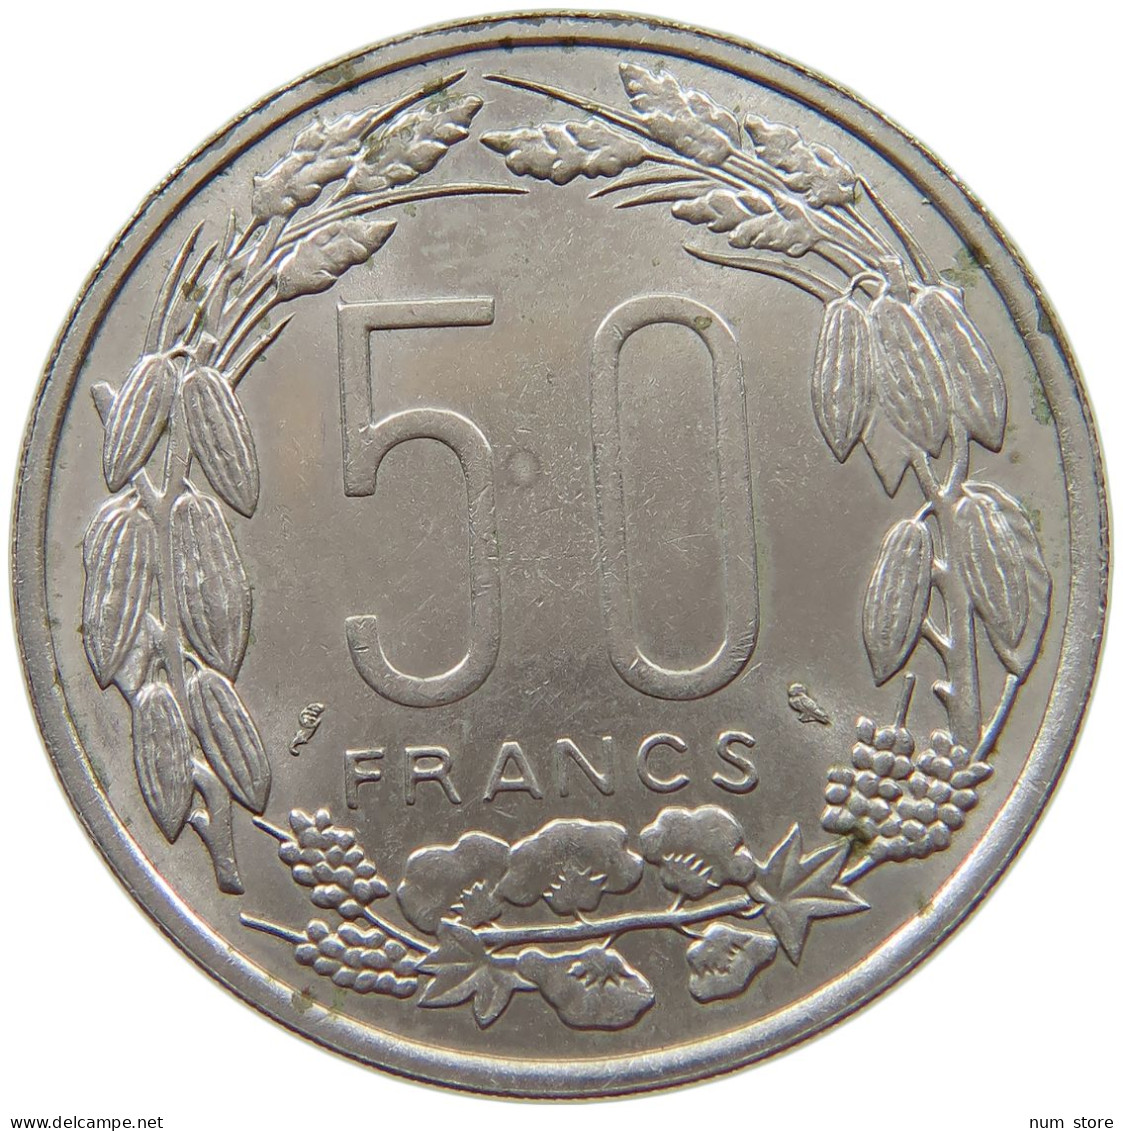 CENTRAL AFRICA 50 FRANCS 1961  #s070 0109 - Centraal-Afrikaanse Republiek